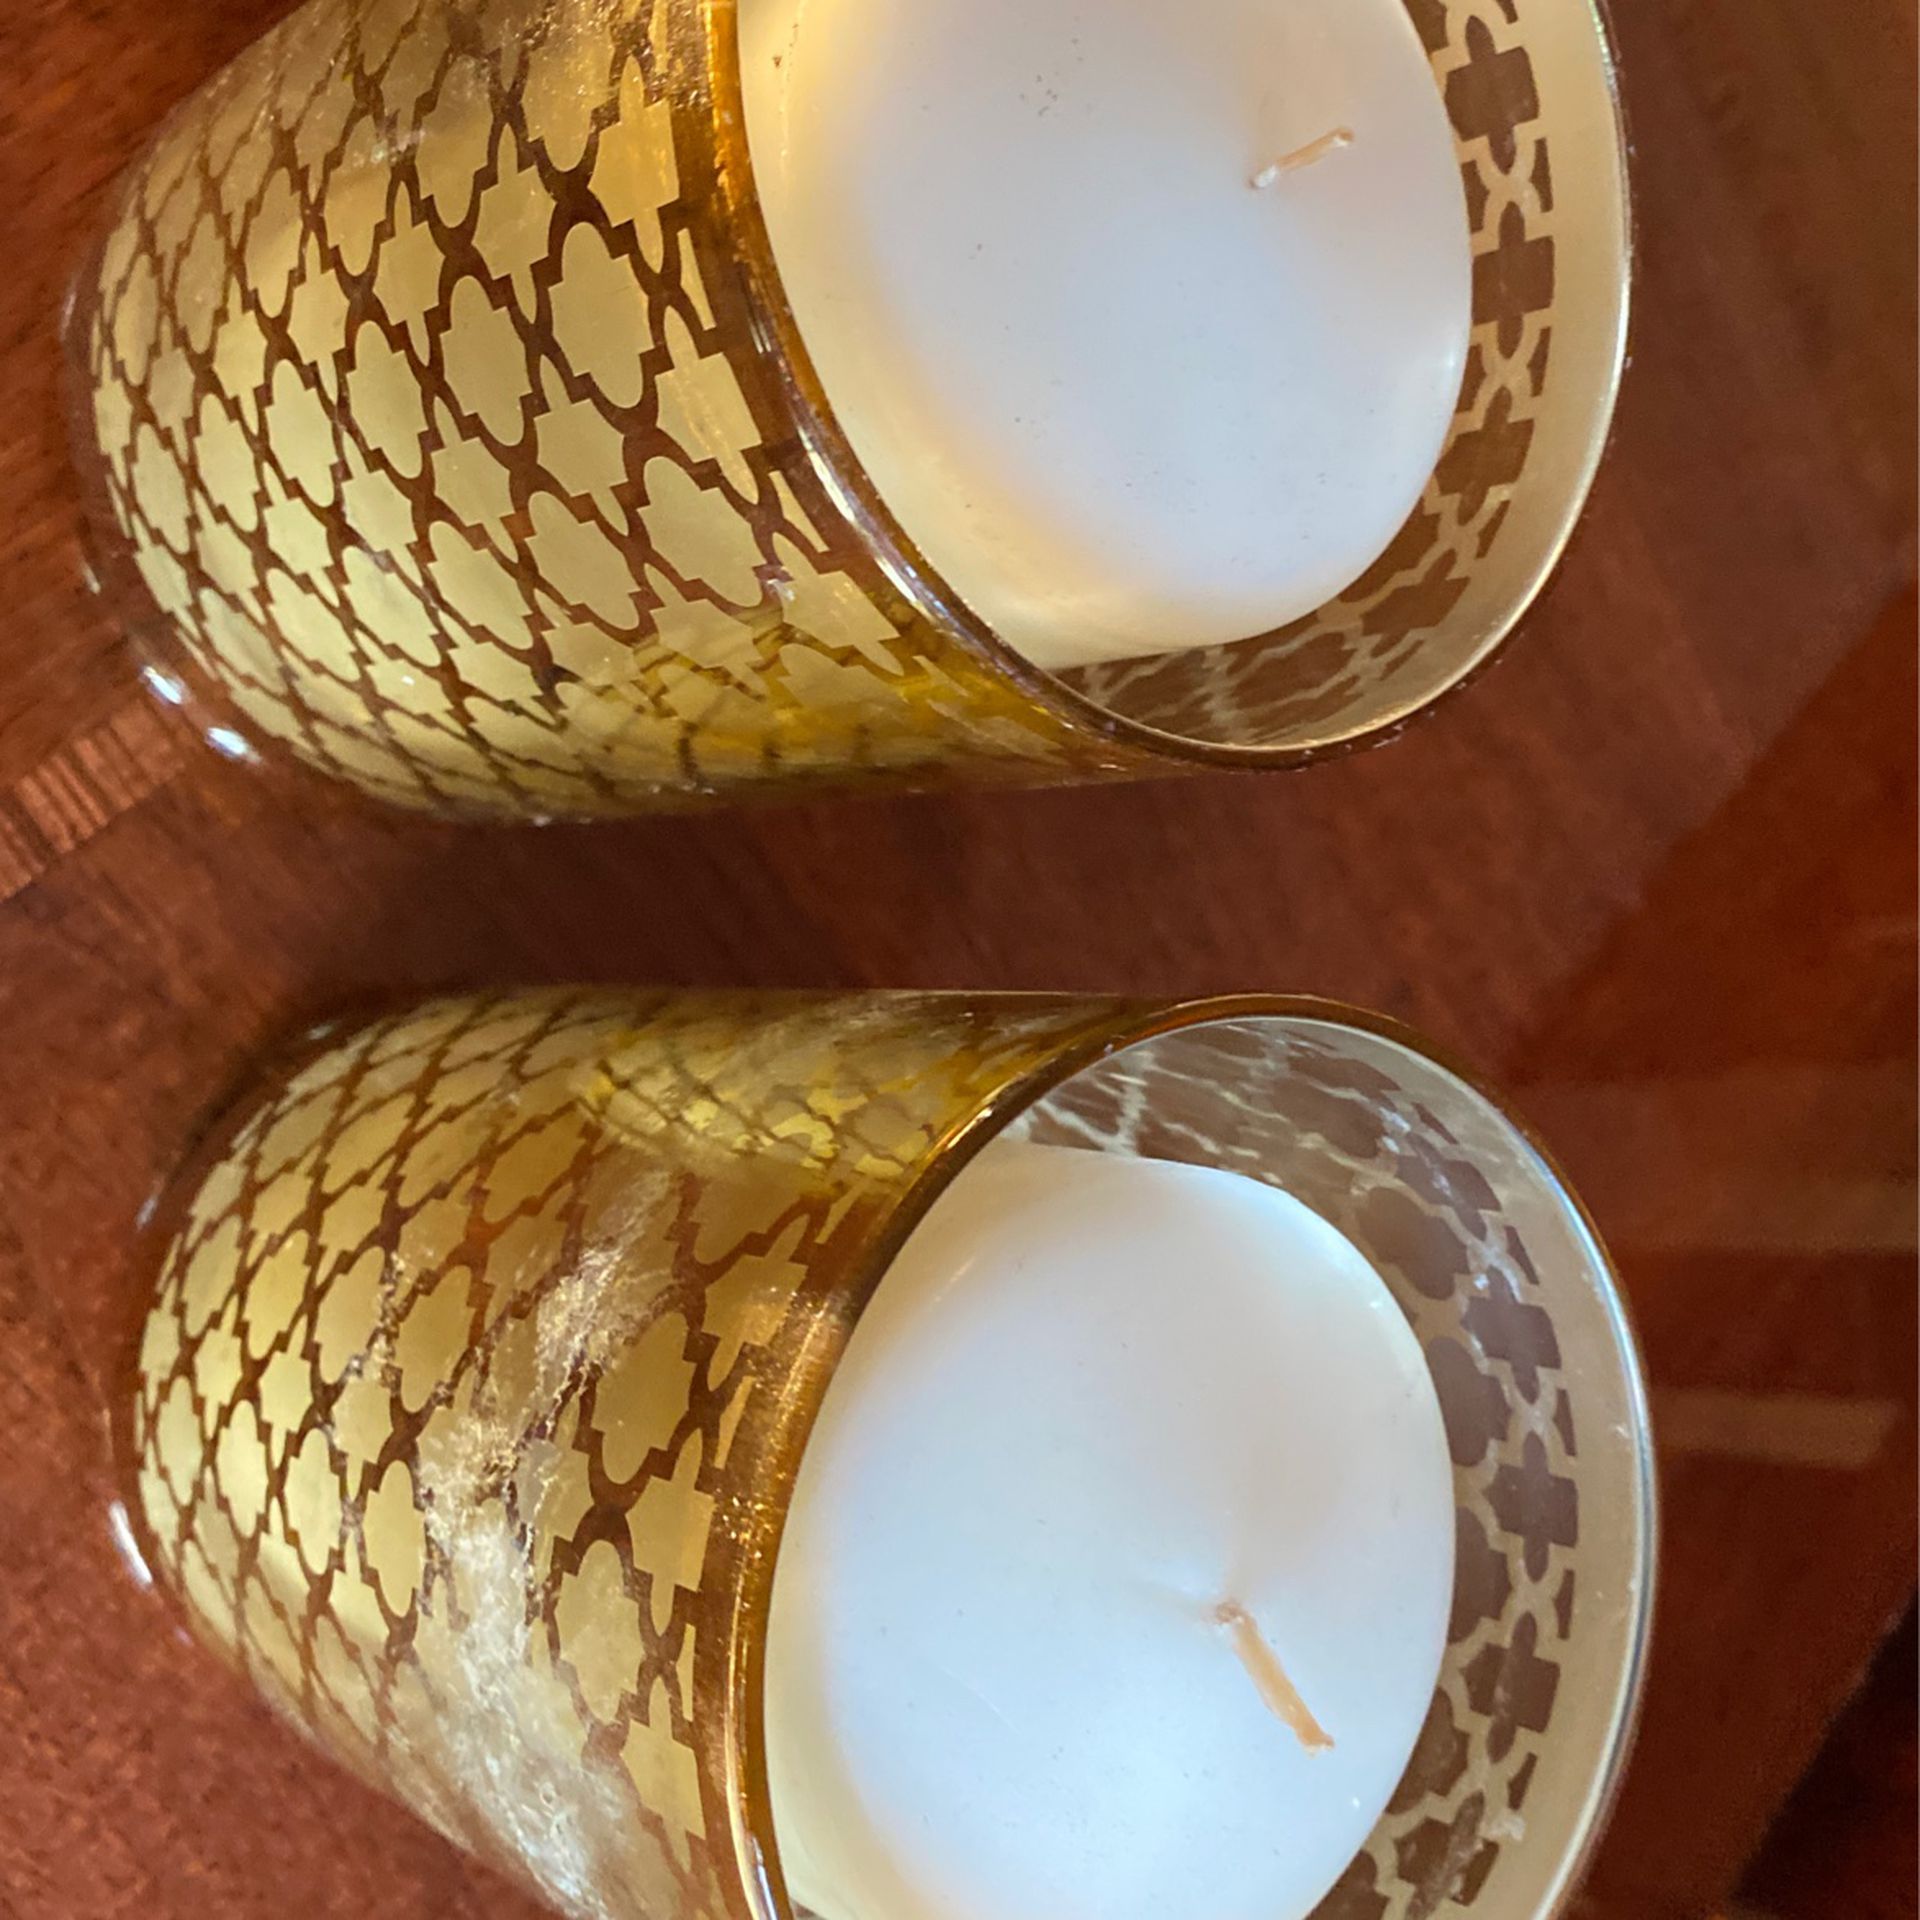 Pair of candles with holders 6 inches tall.